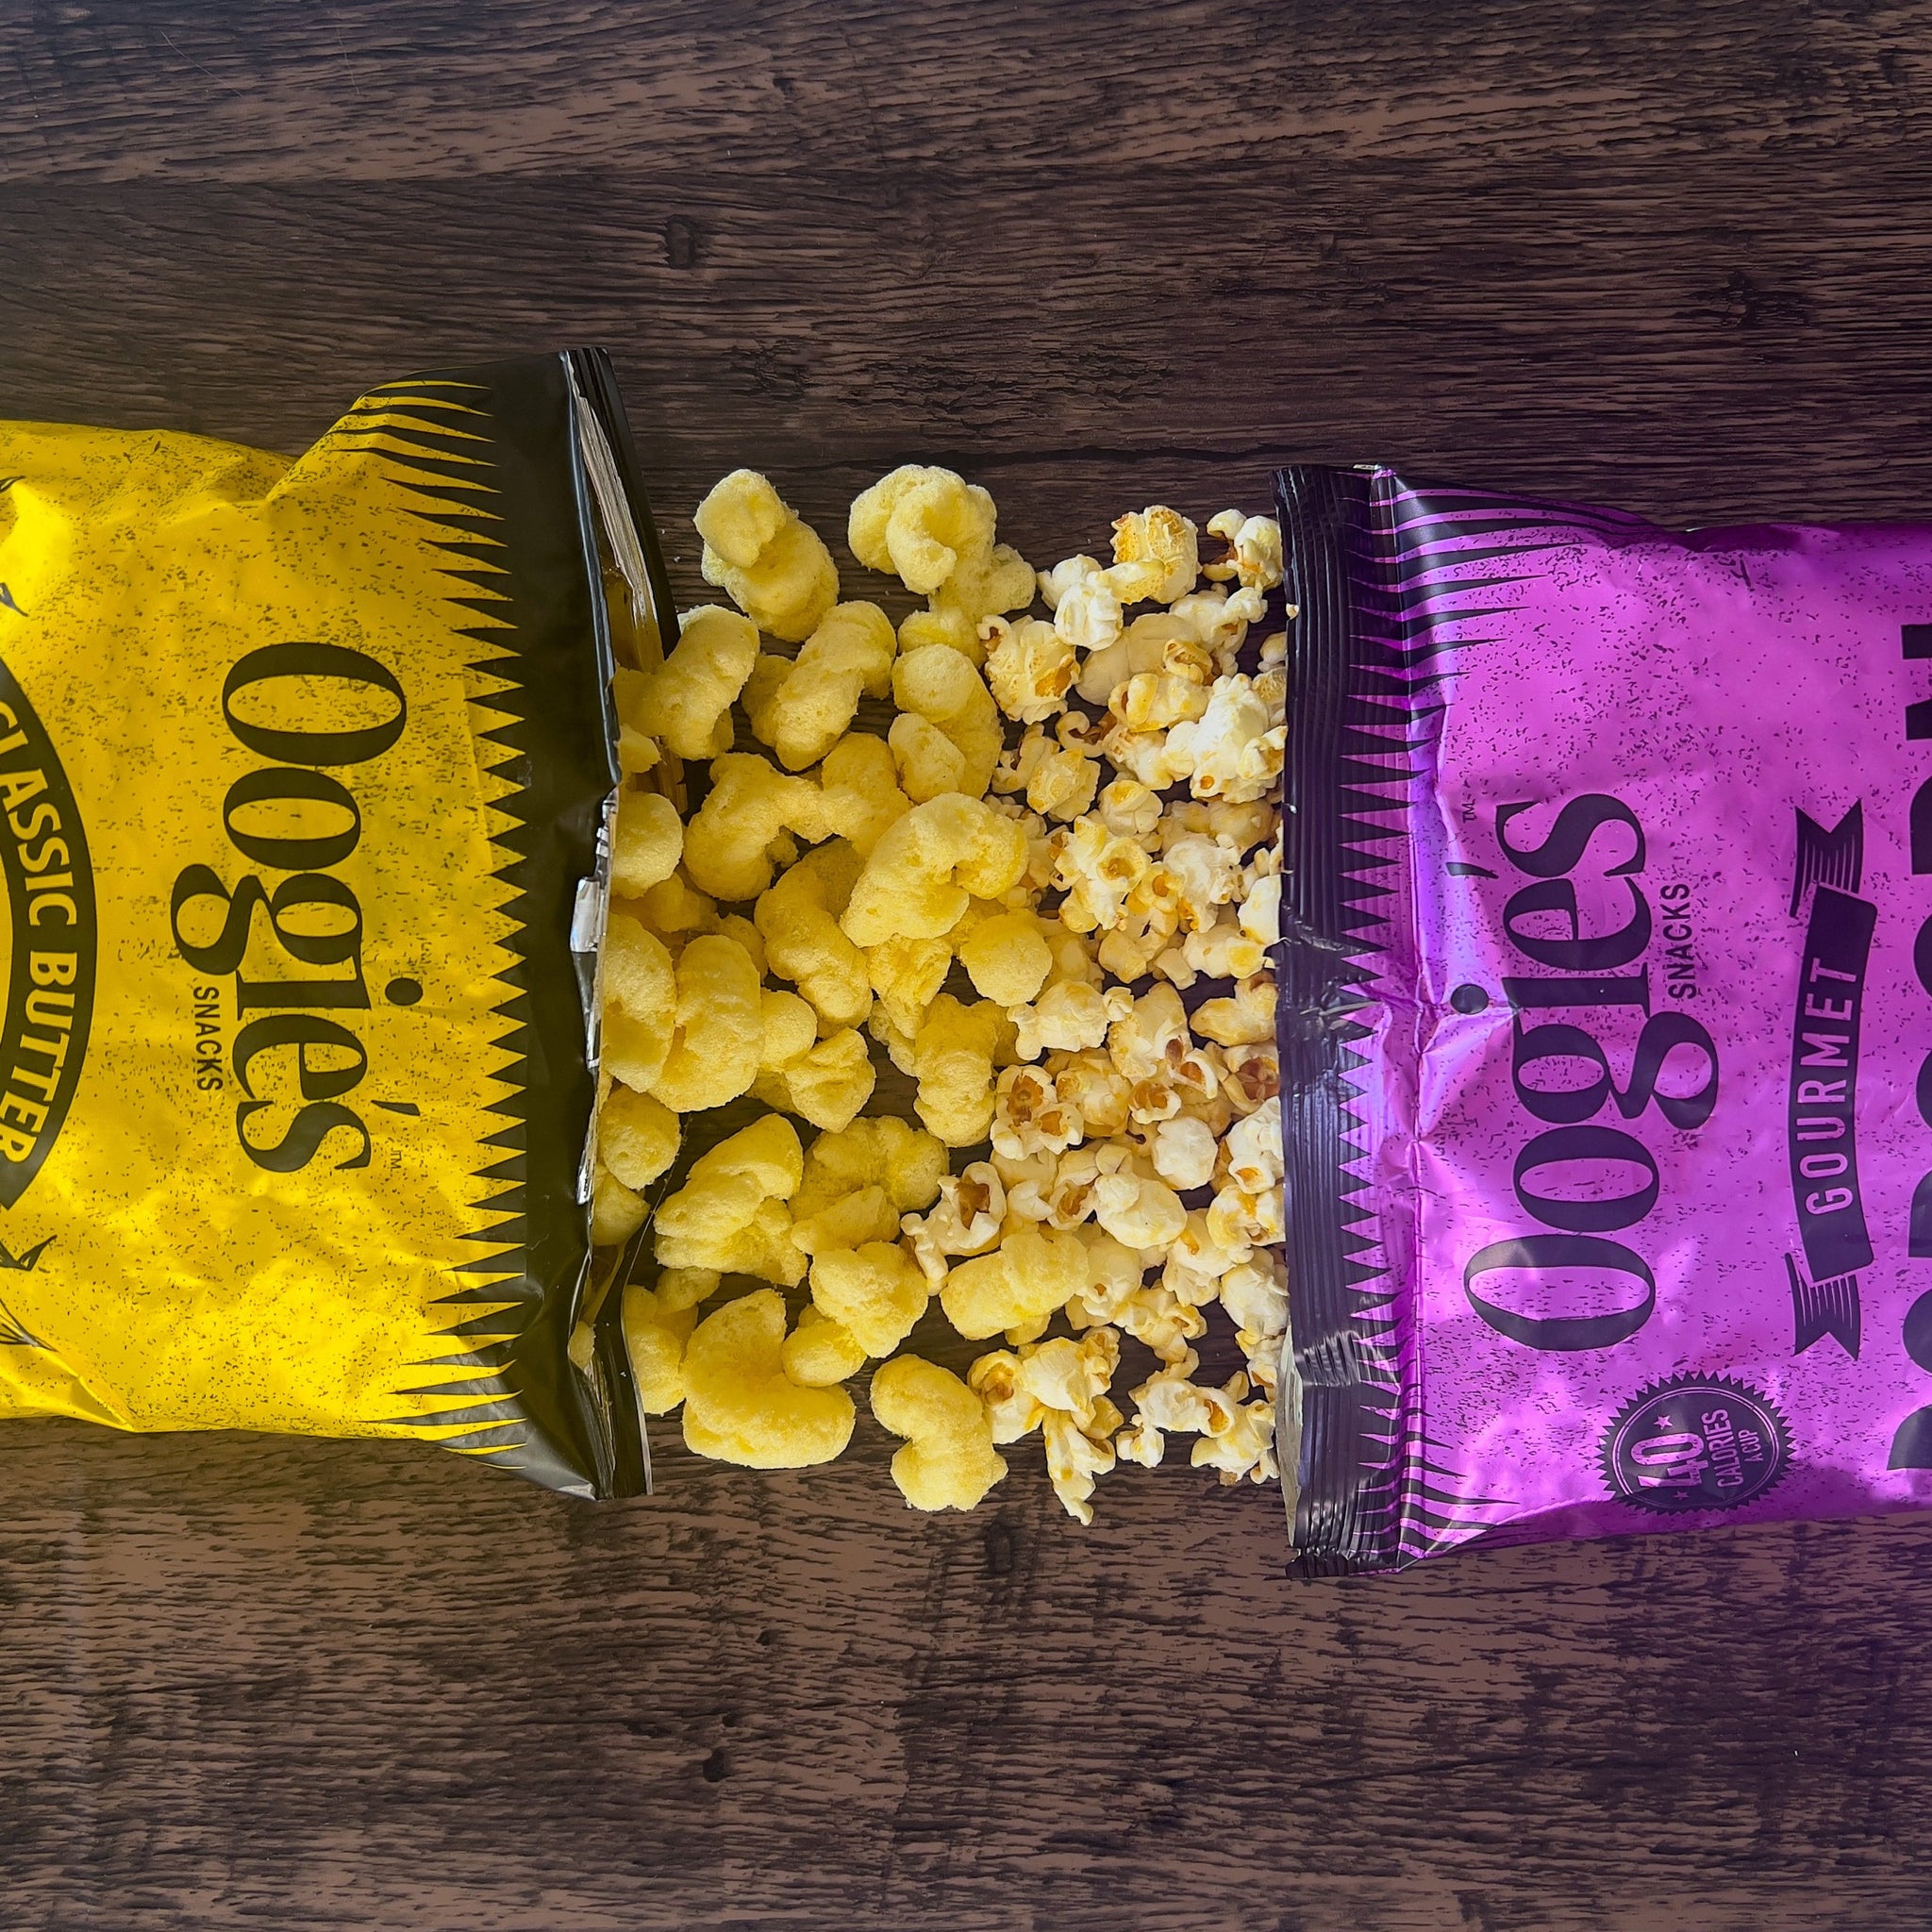 Snack Size Popcorn Variety Pack (18-1oz bags) – Oogie's Snacks